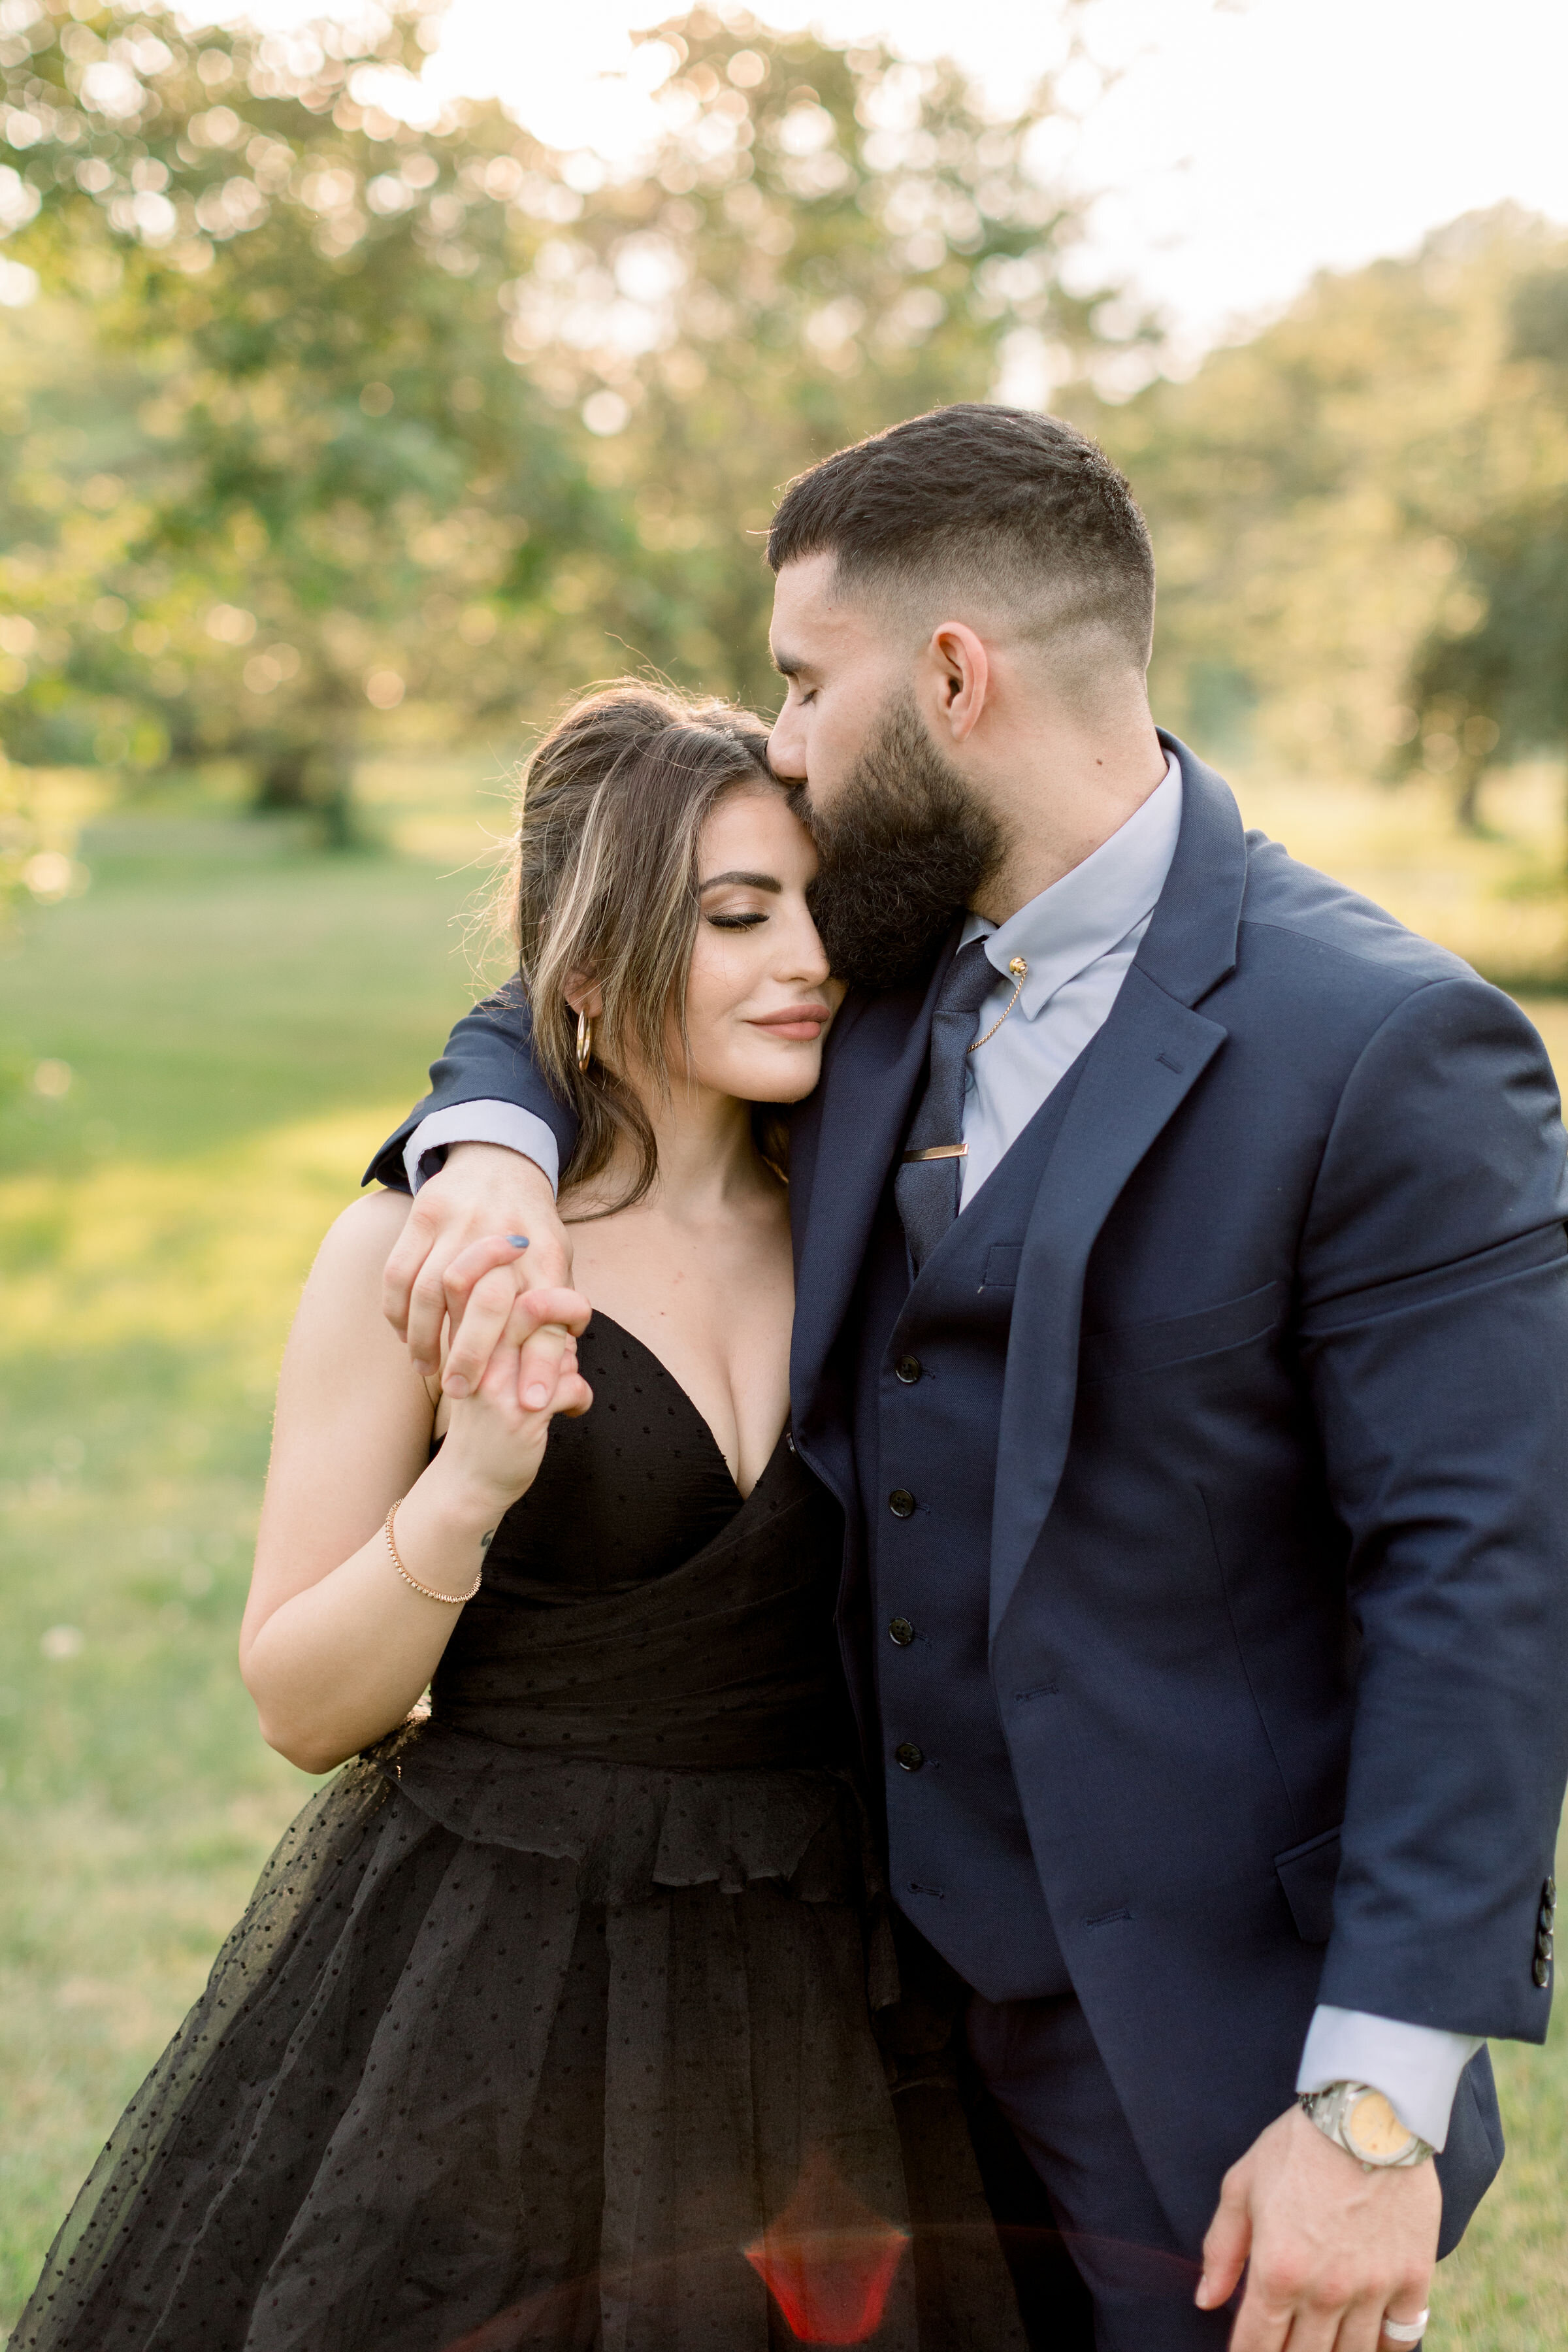  During this park engagement session in Ottawa, Canada, Chelsea Mason photography captures this couple romantically wrapping their arms around one another while this groom kisses his fiancé's forehead. man kissing woman's forehead romantic couples ph